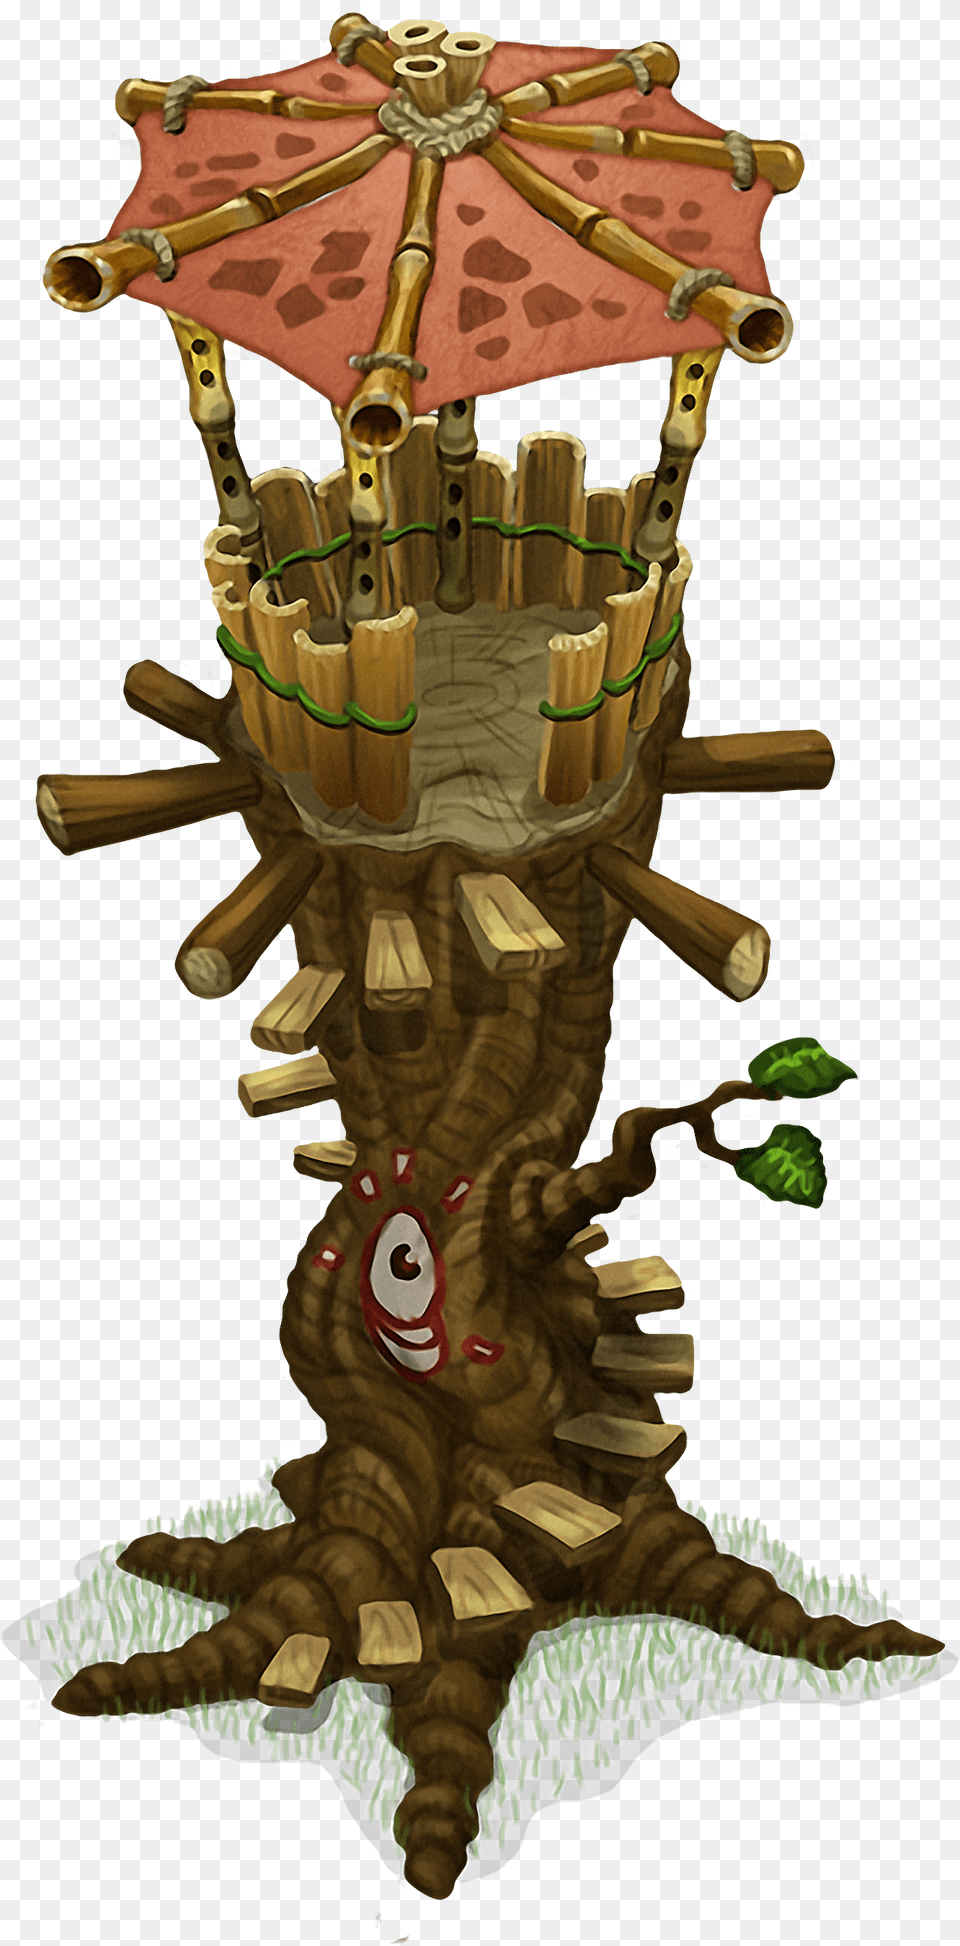 Tree Forte Tower My Singing Monsters Wiki Fandom My Singing Monsters Decorations, Architecture, Emblem, Pillar, Symbol Png